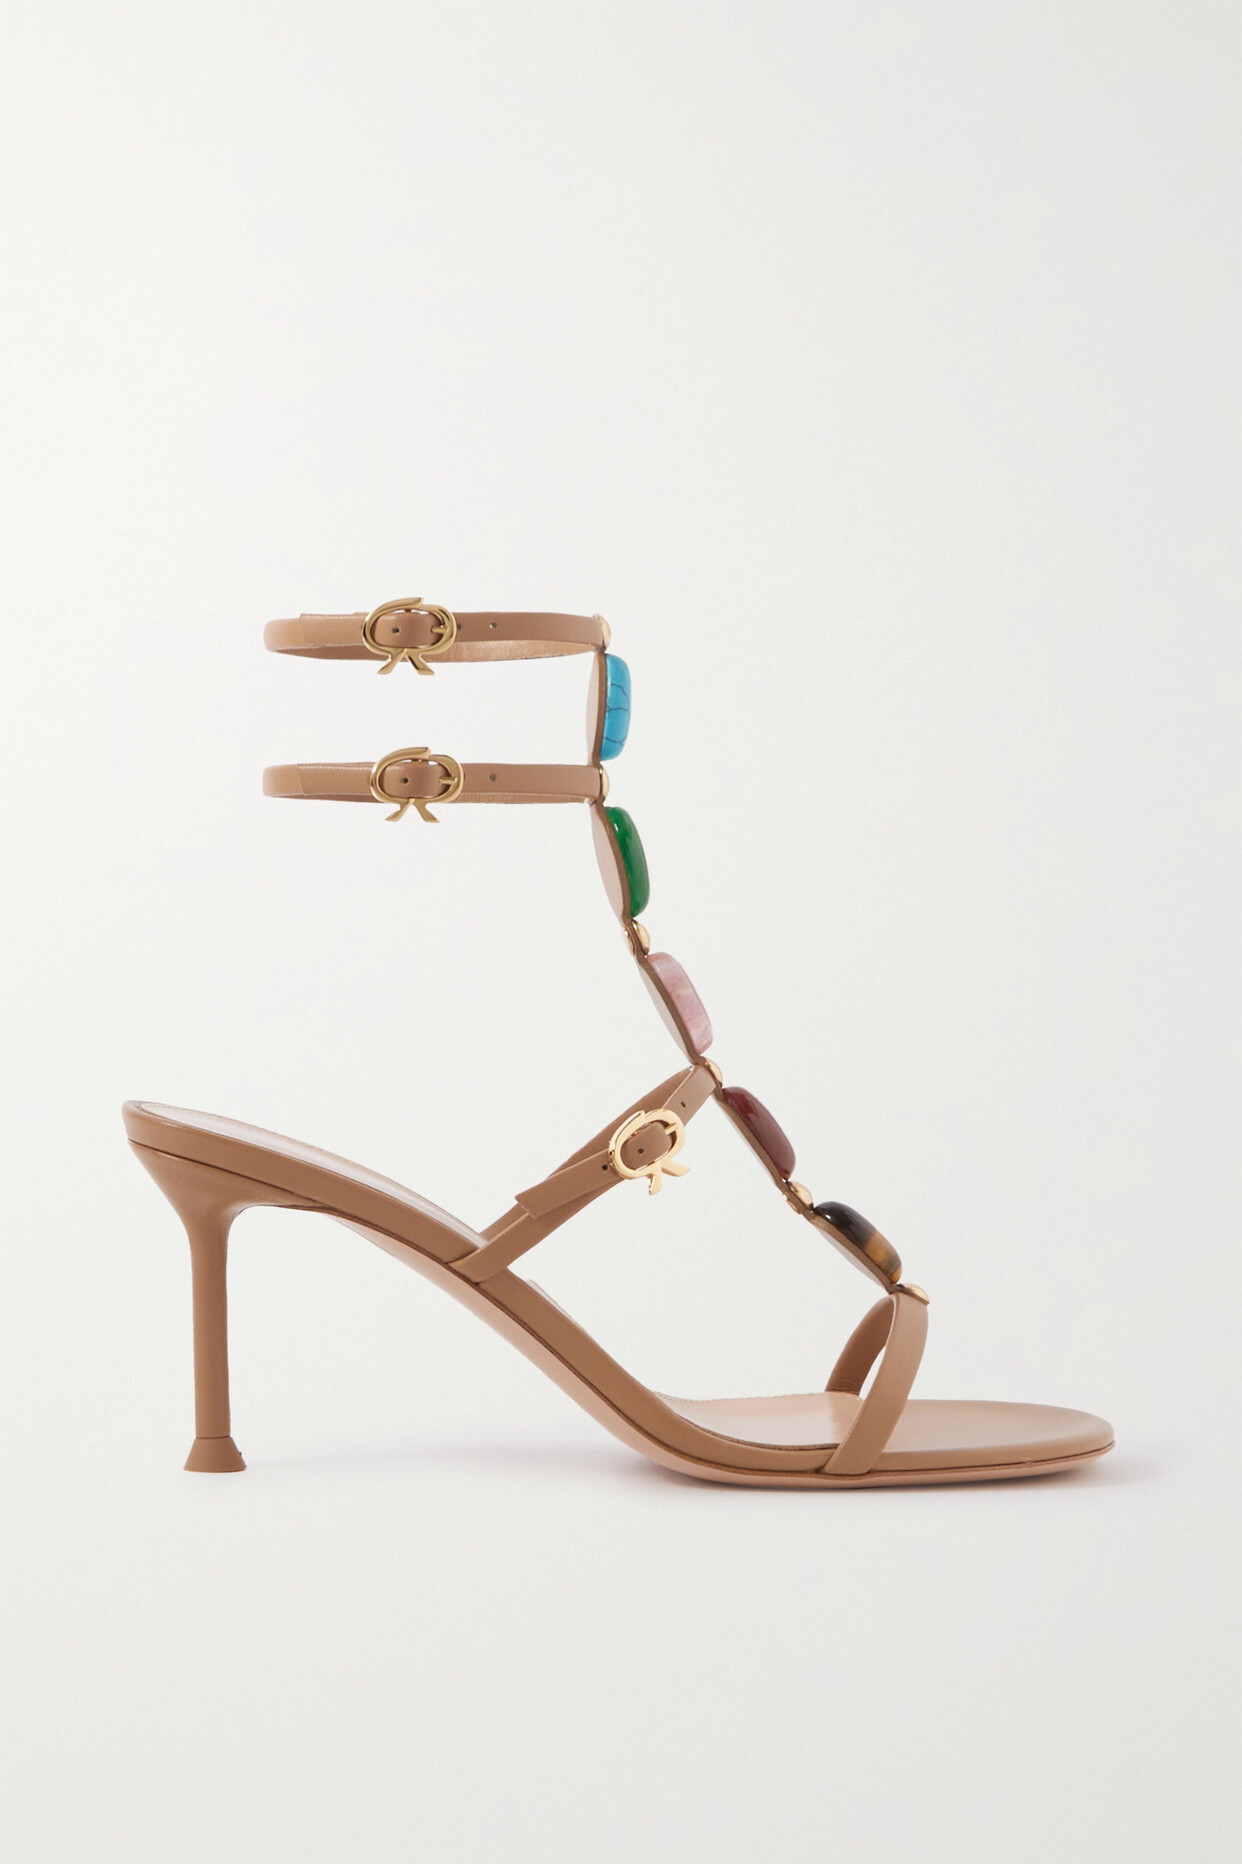 Gianvito Rossi - Shanti 70 Embellished Leather Sandals - Neutrals